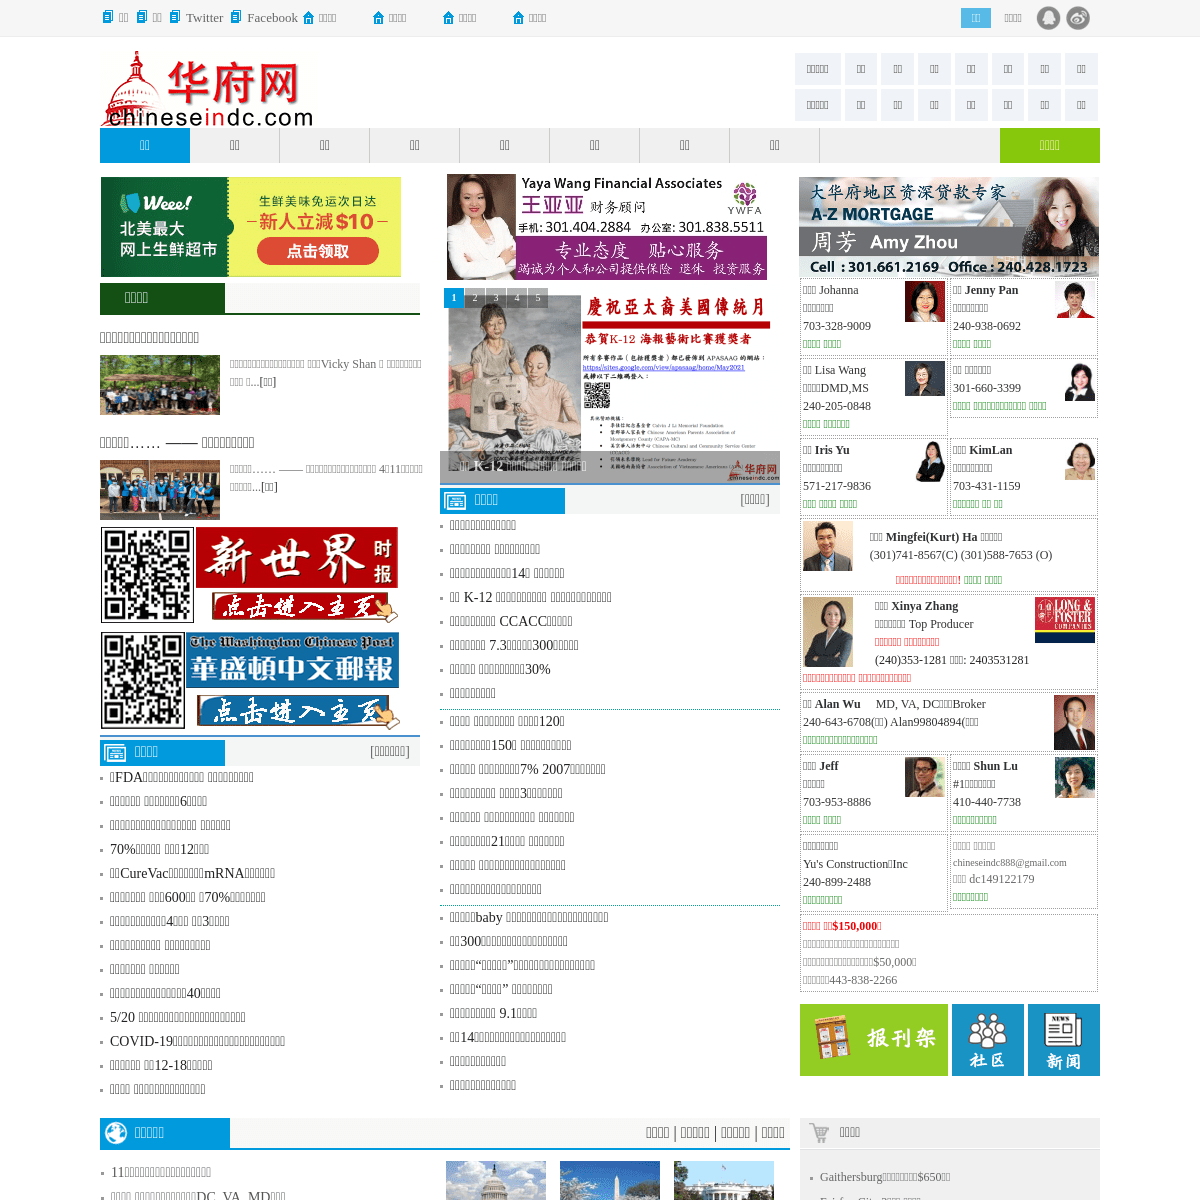 A complete backup of https://chineseindc.com